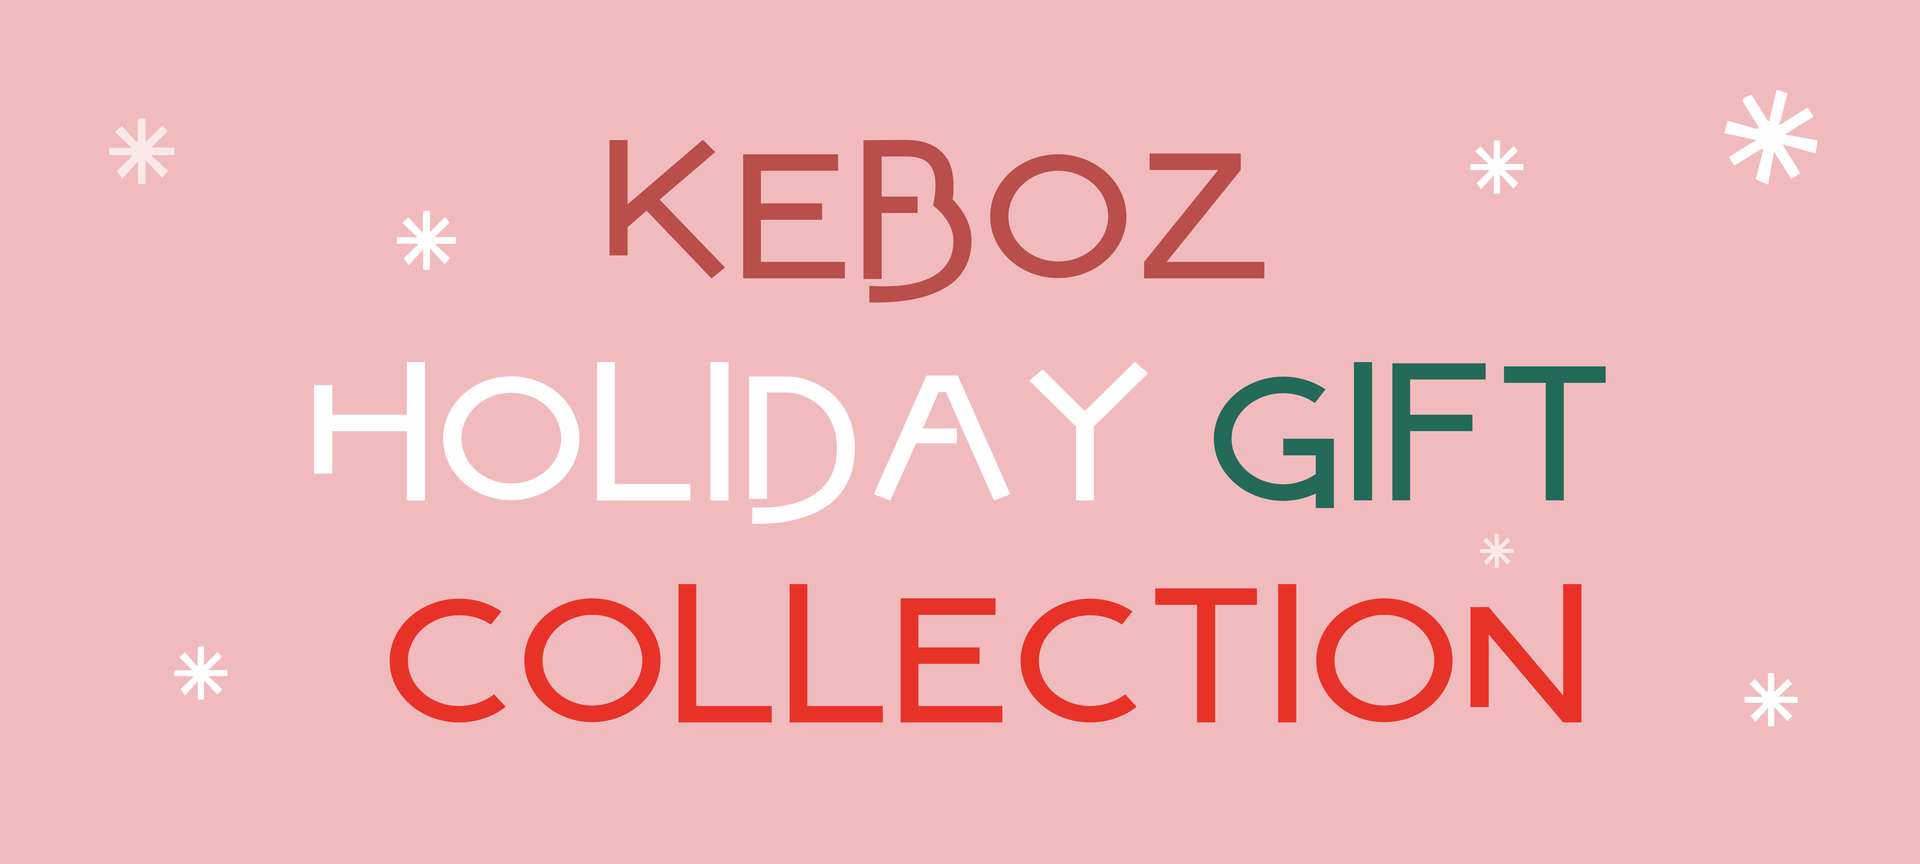 HOLIDAY GIFT COLLECTION